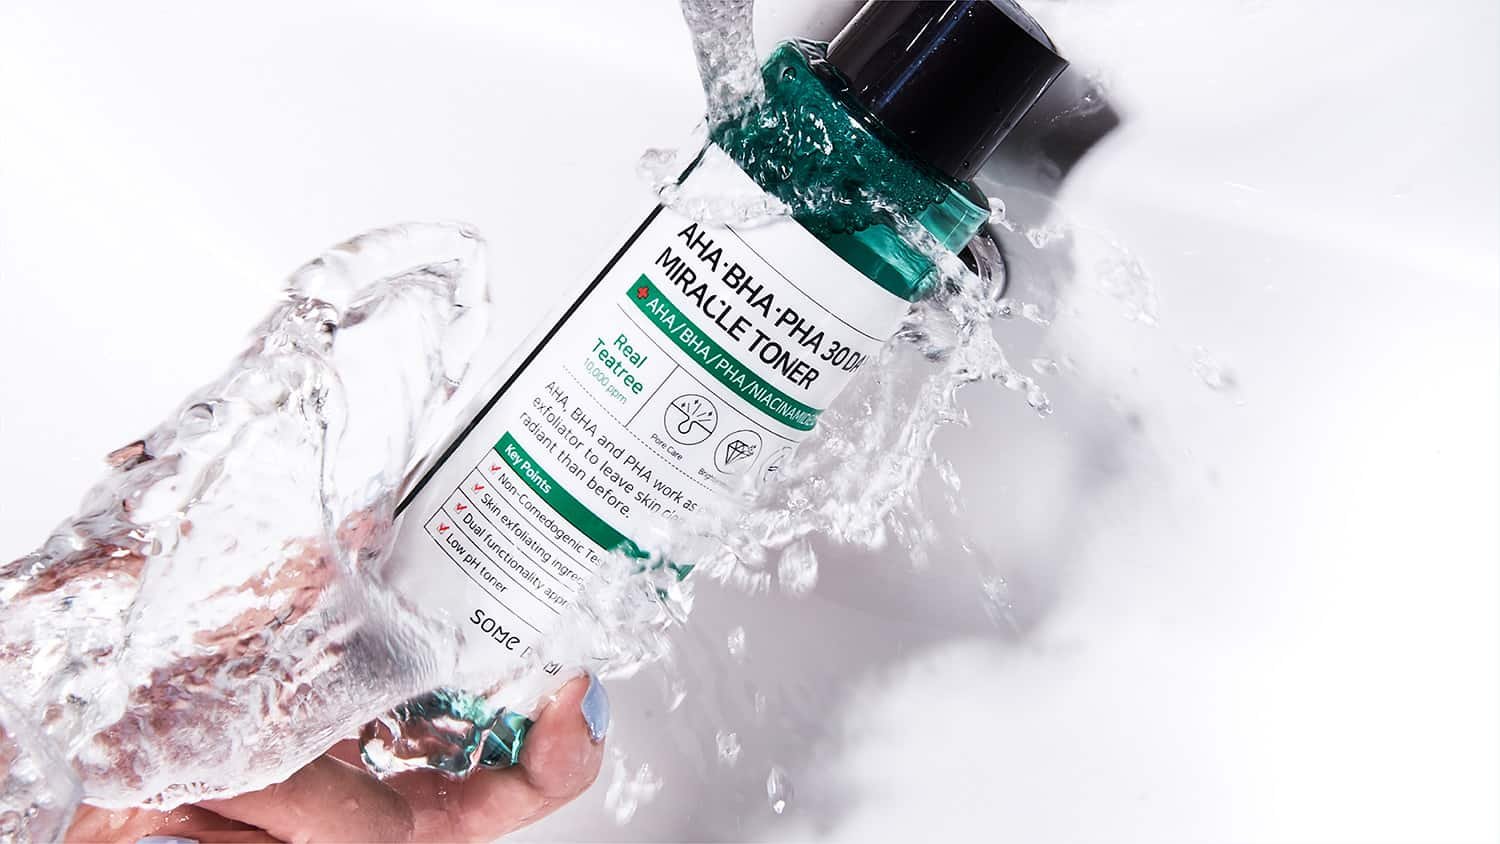 Acne-Fighting Toner is A Mystery For Acne-Prone Skin